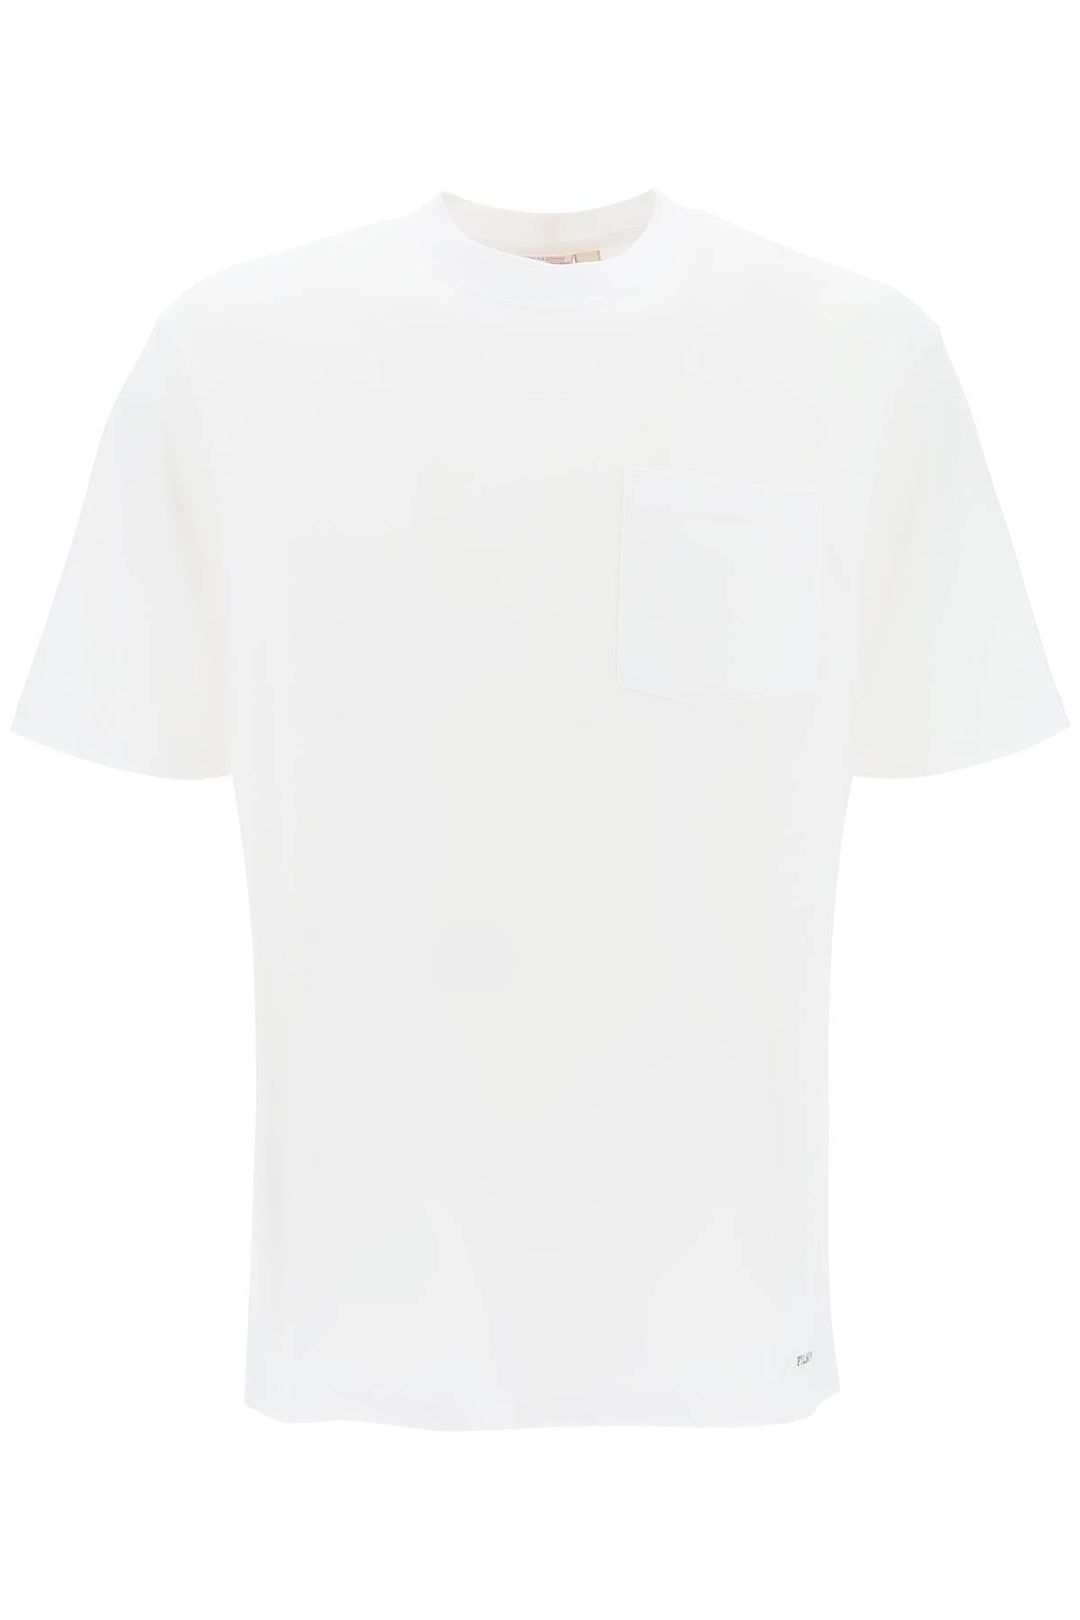 T Shirt Pioneer Solid One Pocket